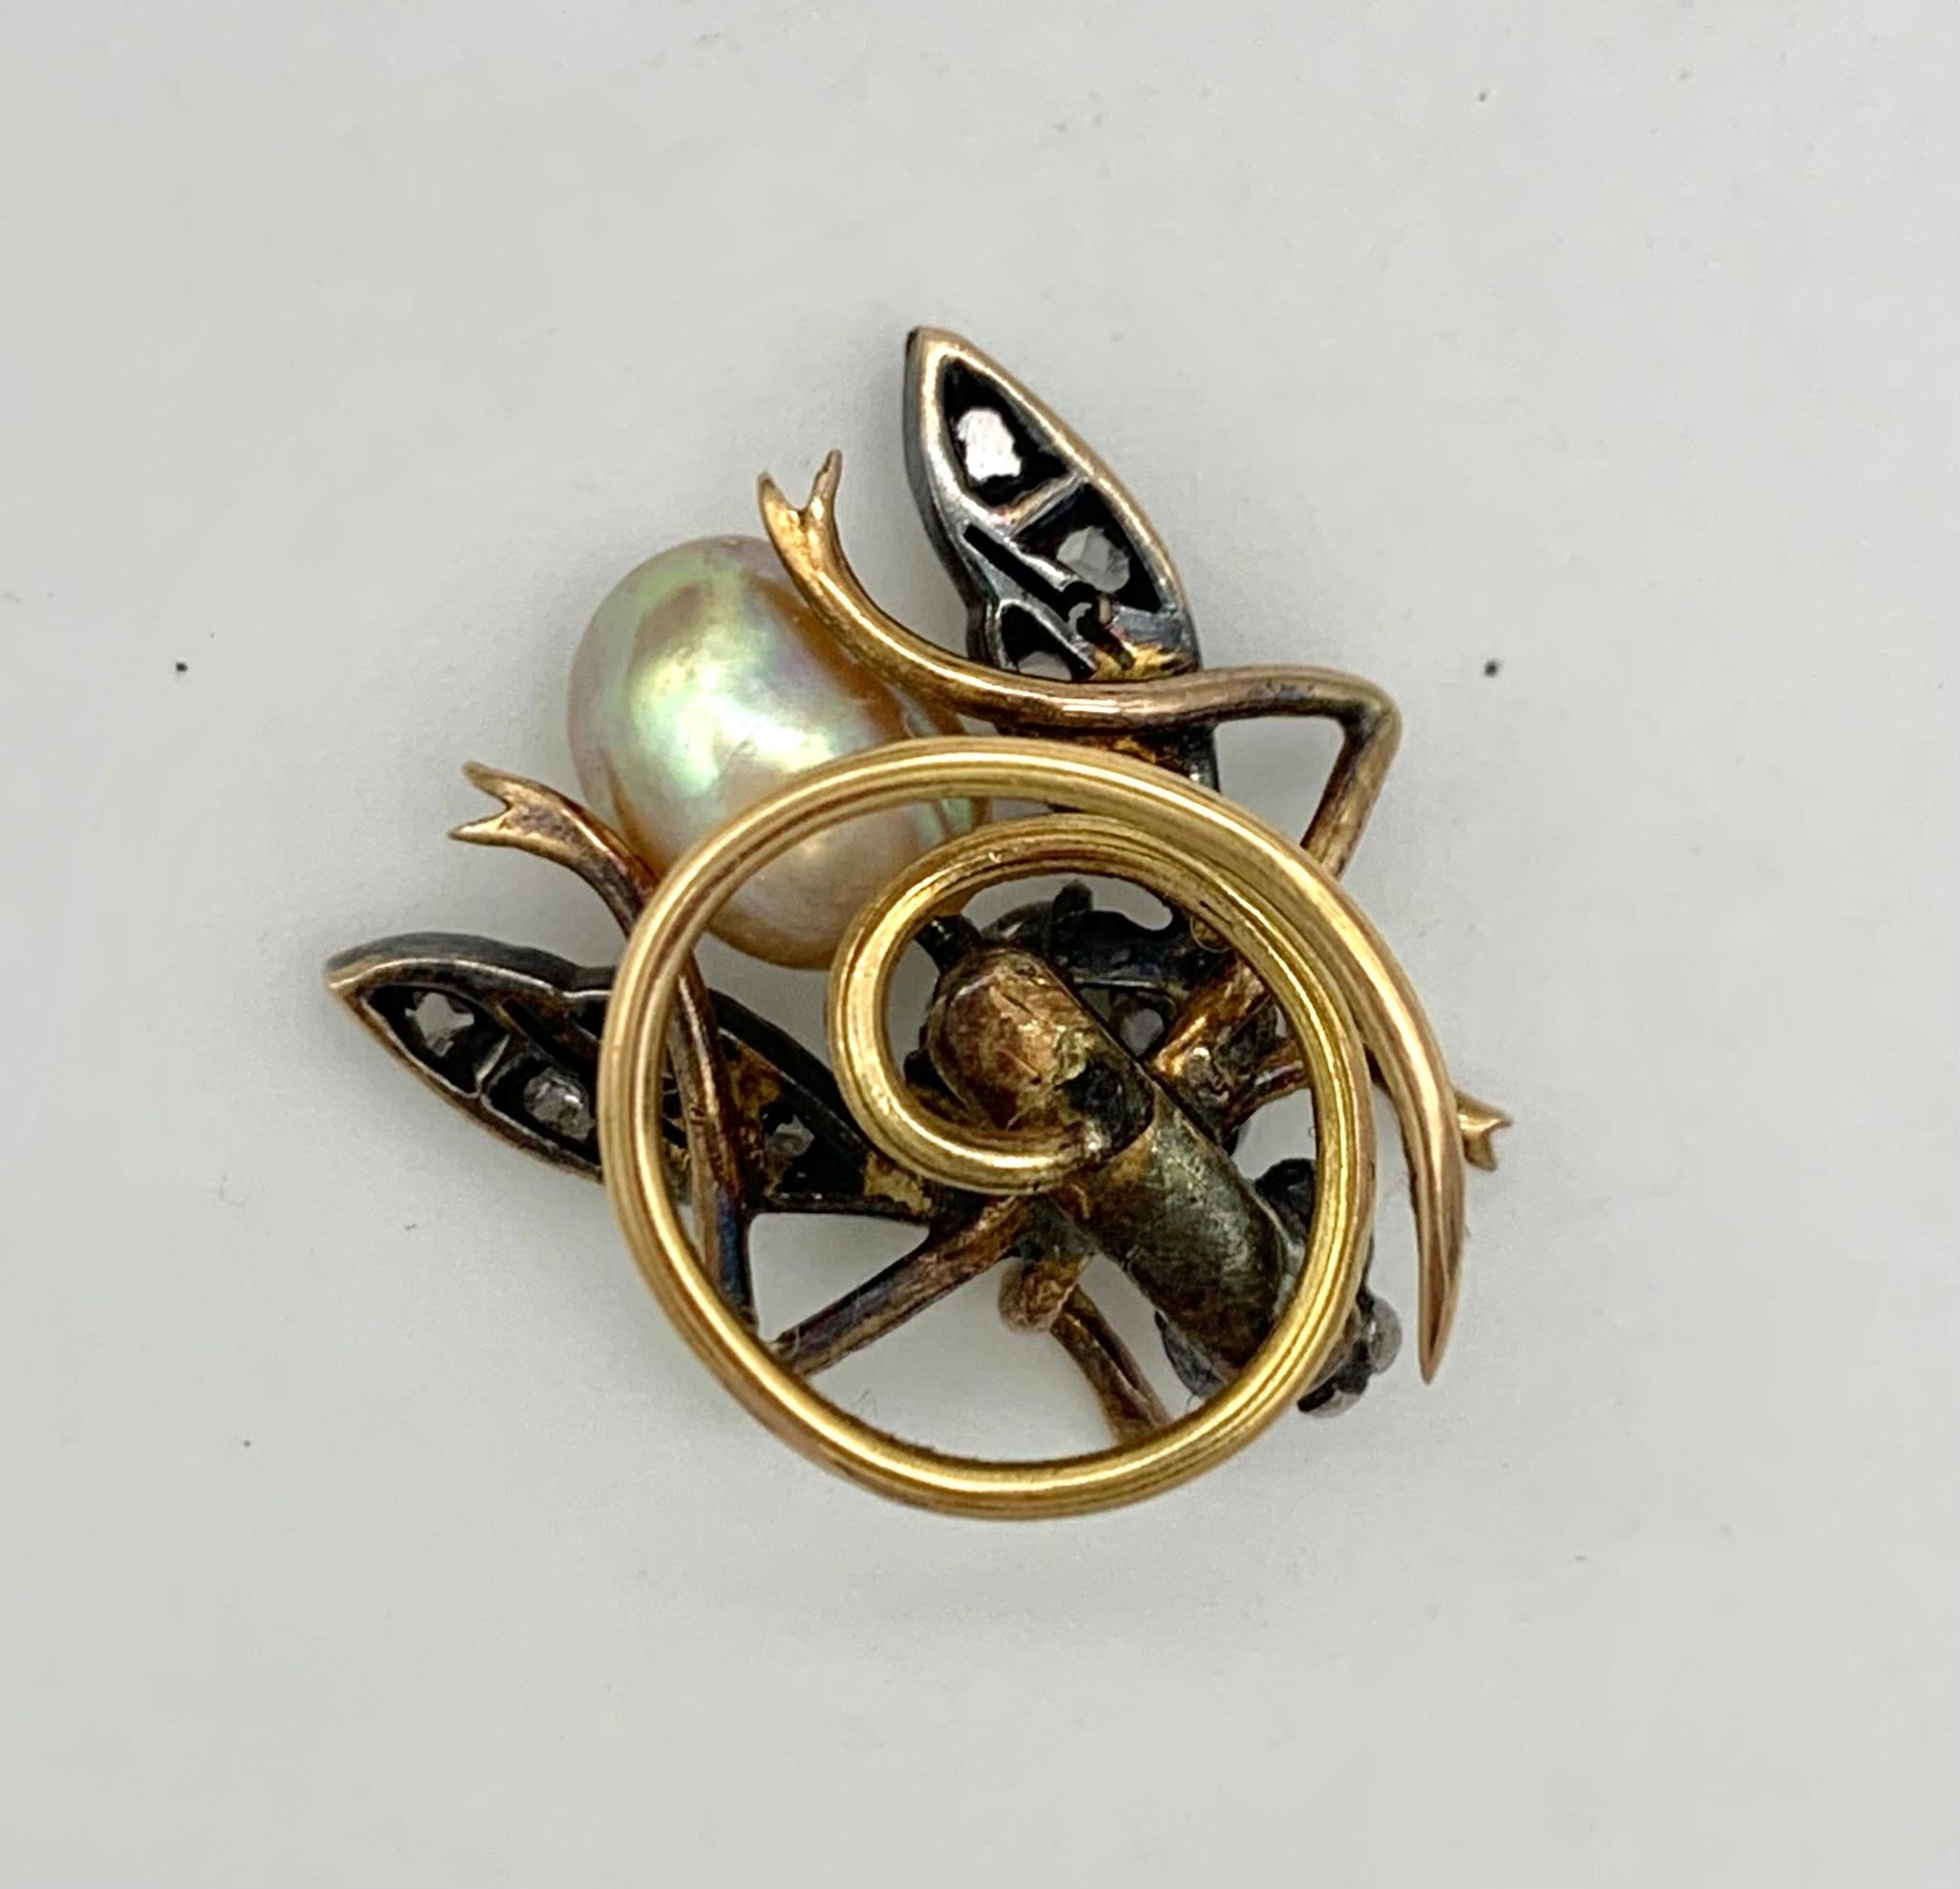 This delightful jewel features a diamond fly with a pinkish gold green baroque pearl body.
The eyes are set with 2 little rubies. In the iconographic language of old master paintings the fly stands for the devil or the evil, therefore the fly